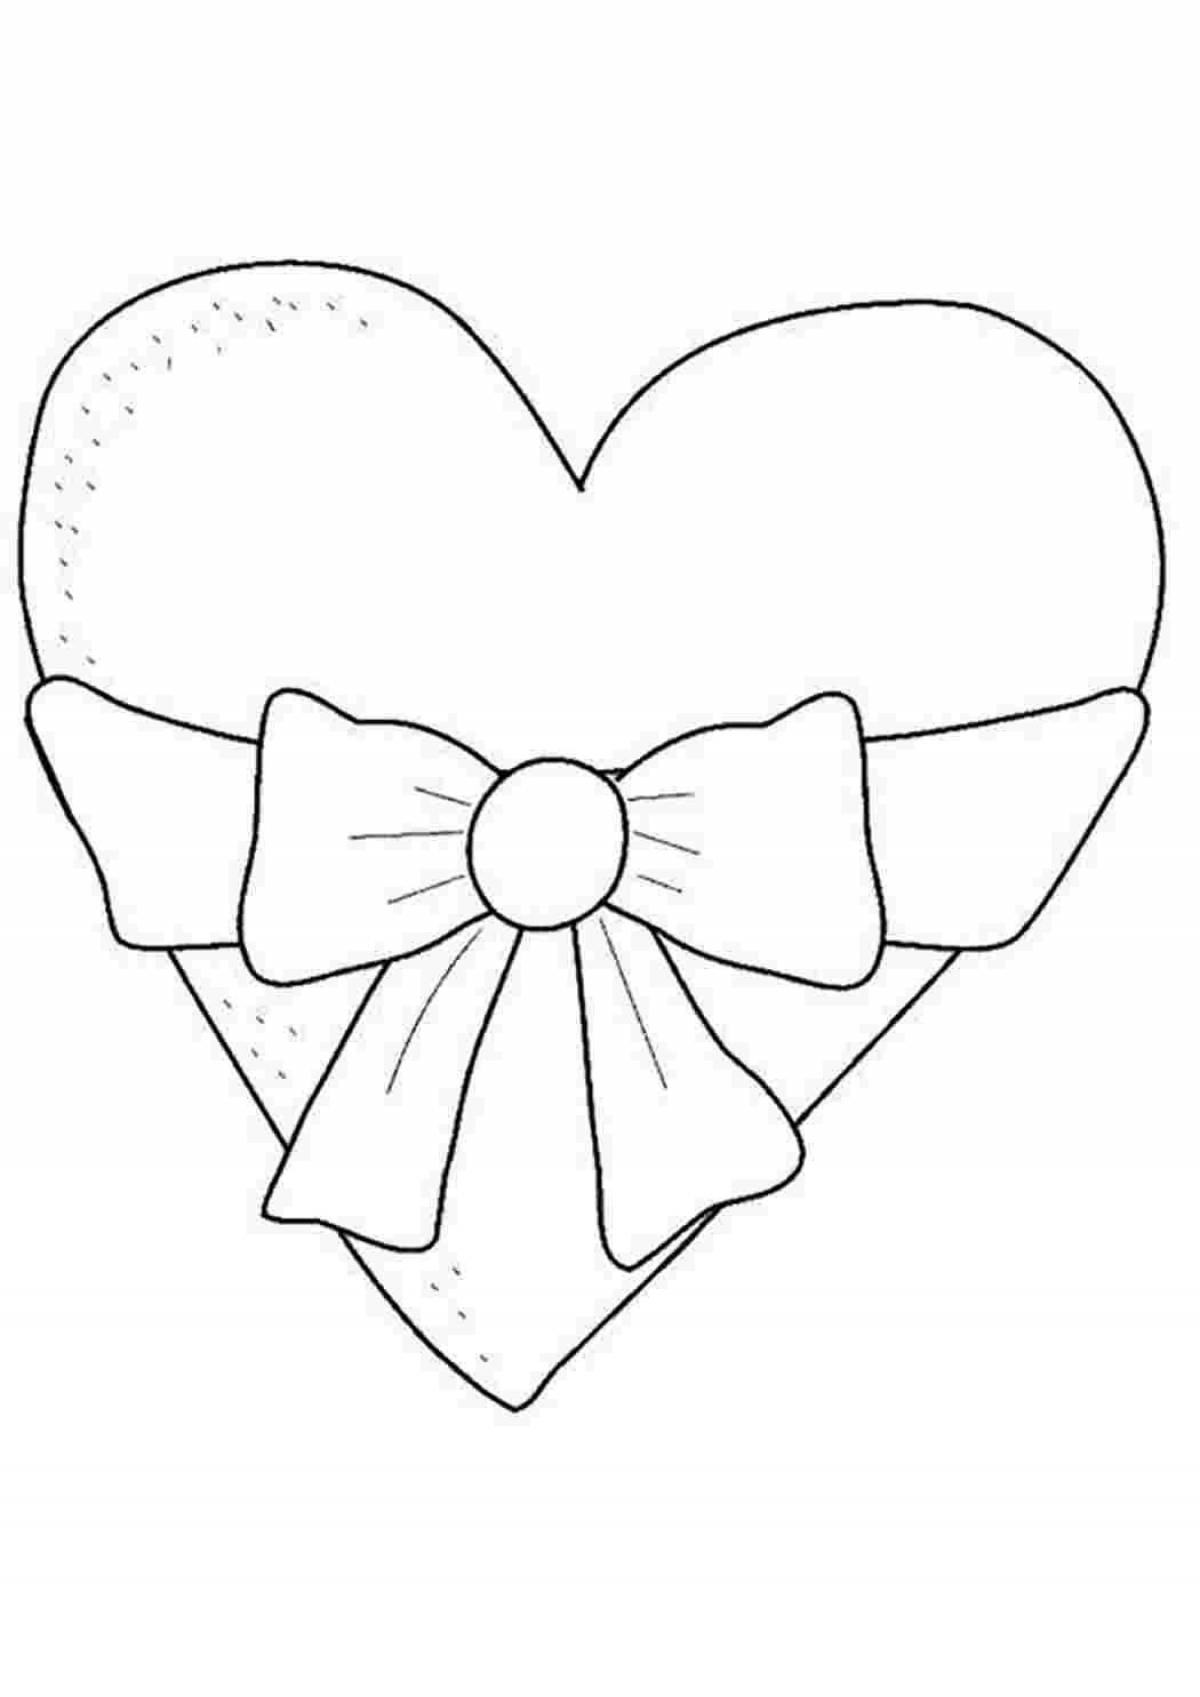 Adorable bow coloring book for kids